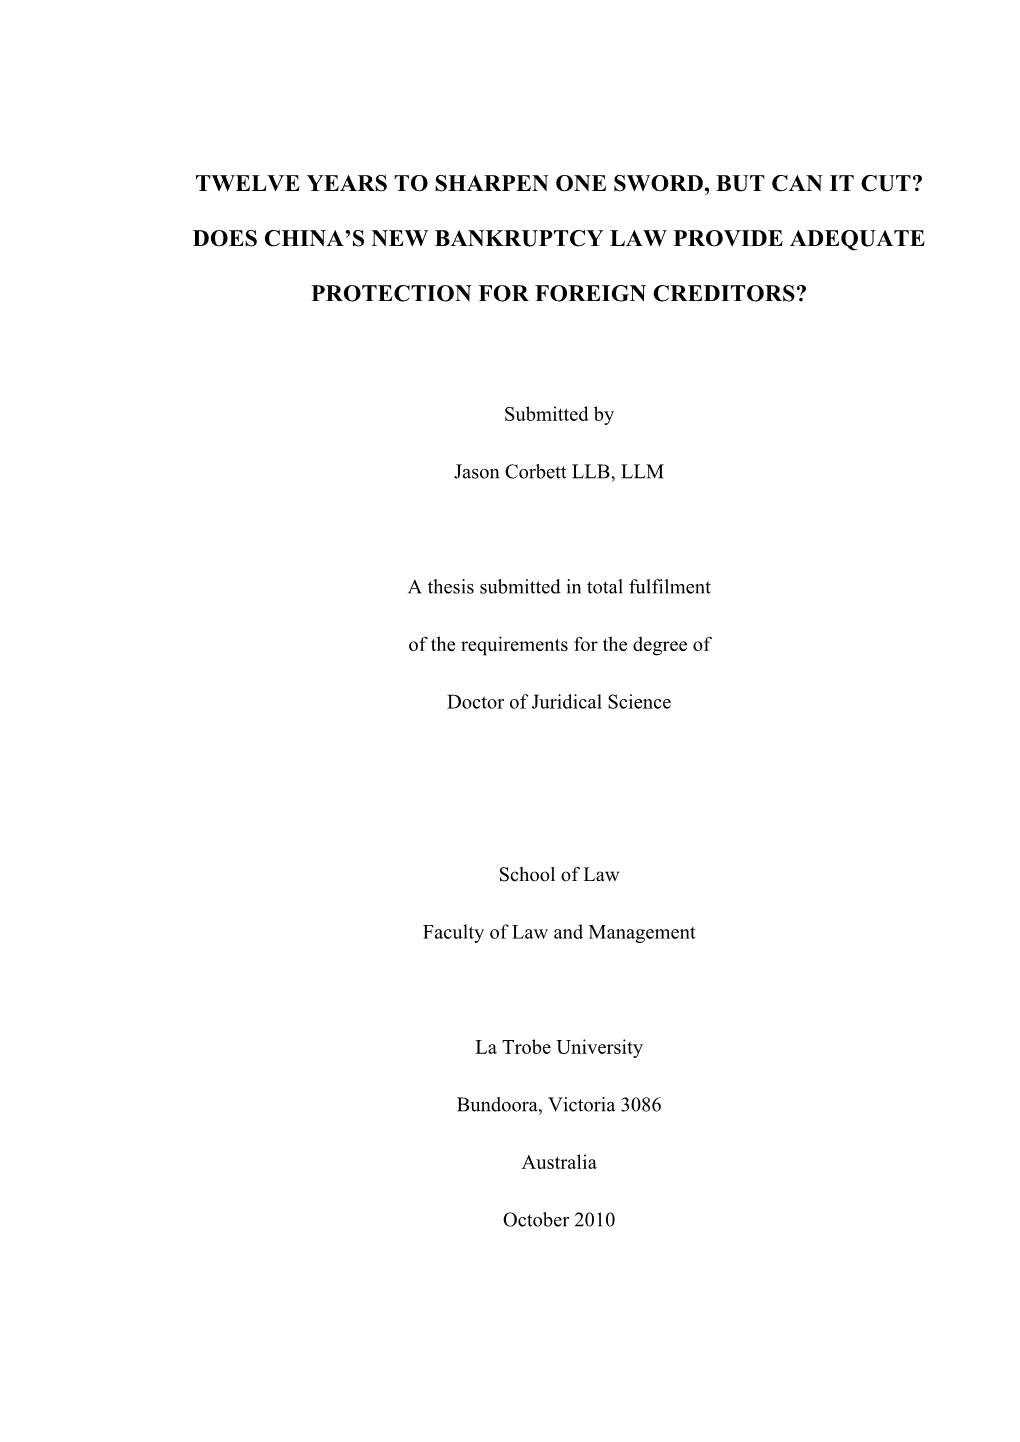 Chinese Bankruptcy Law Thesis 30 September